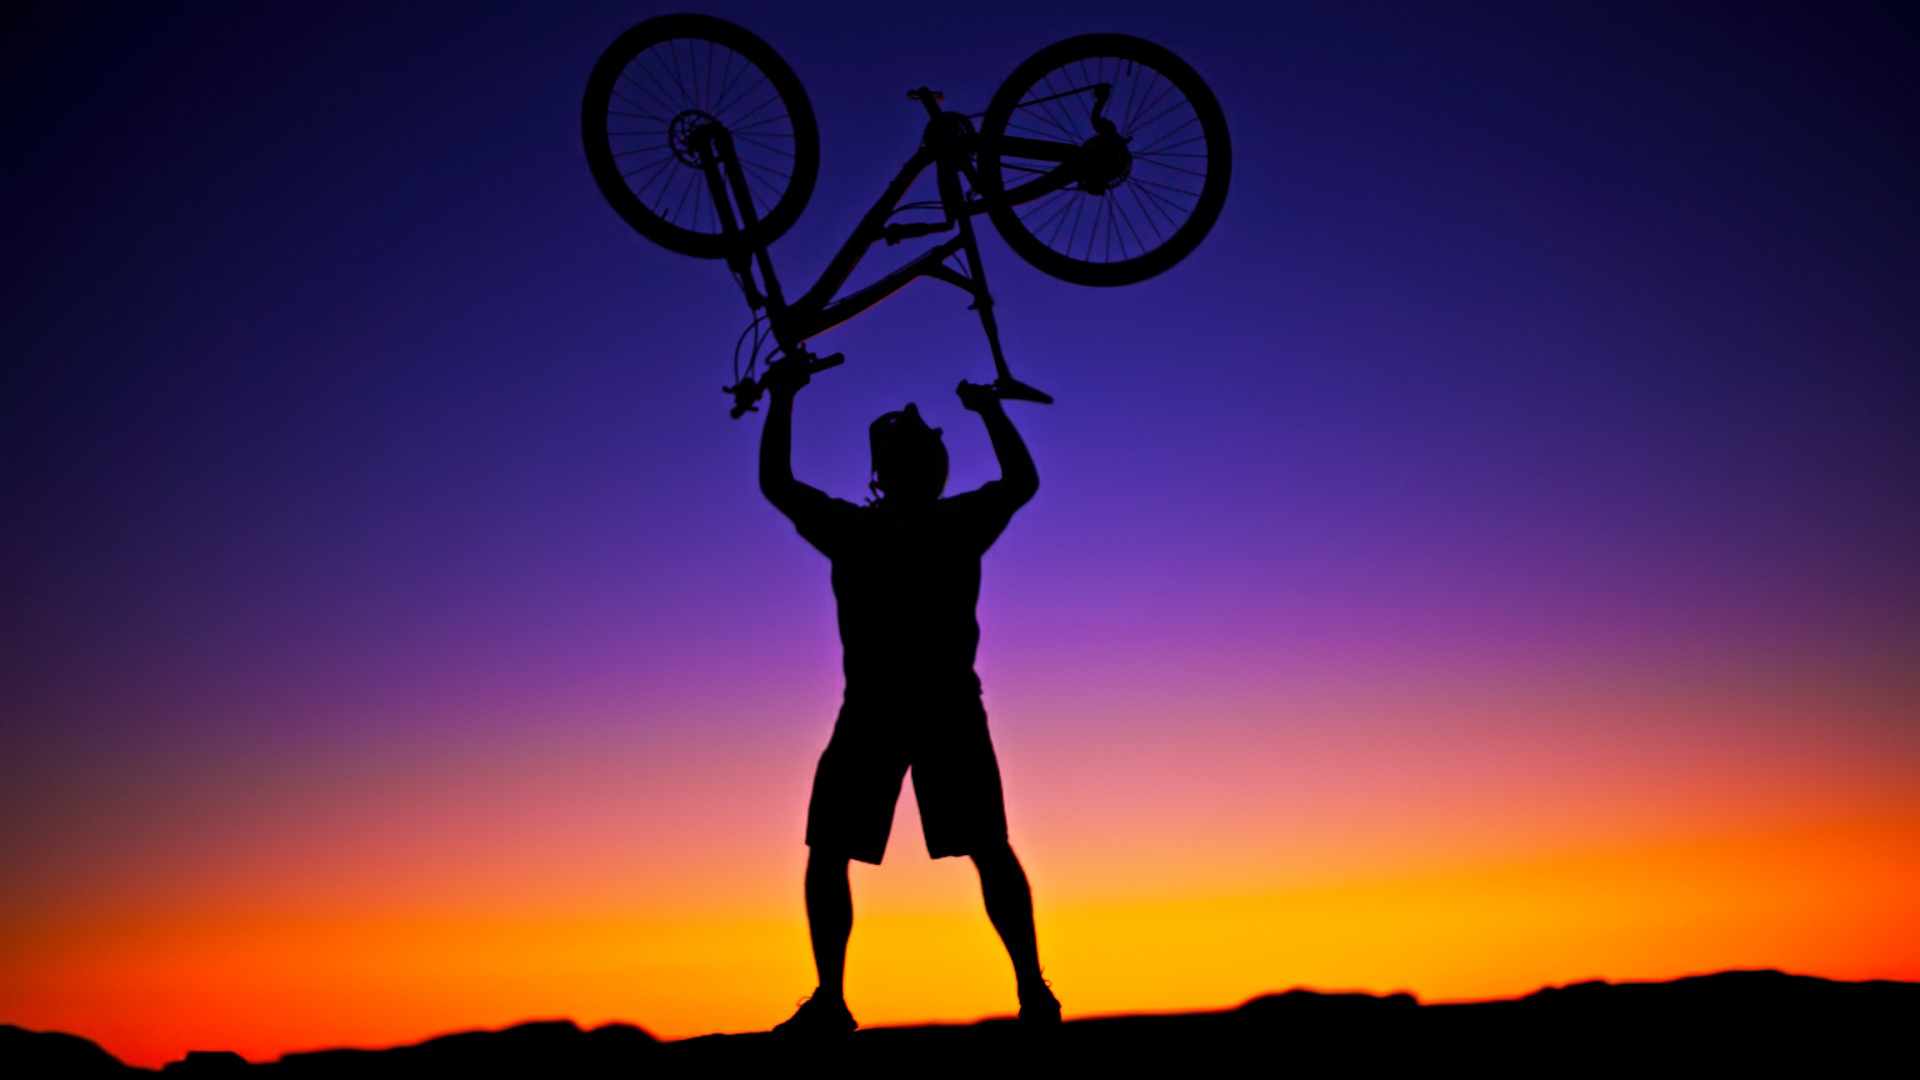 Wallpaper Bicycle Silhouette Cyclist Victory